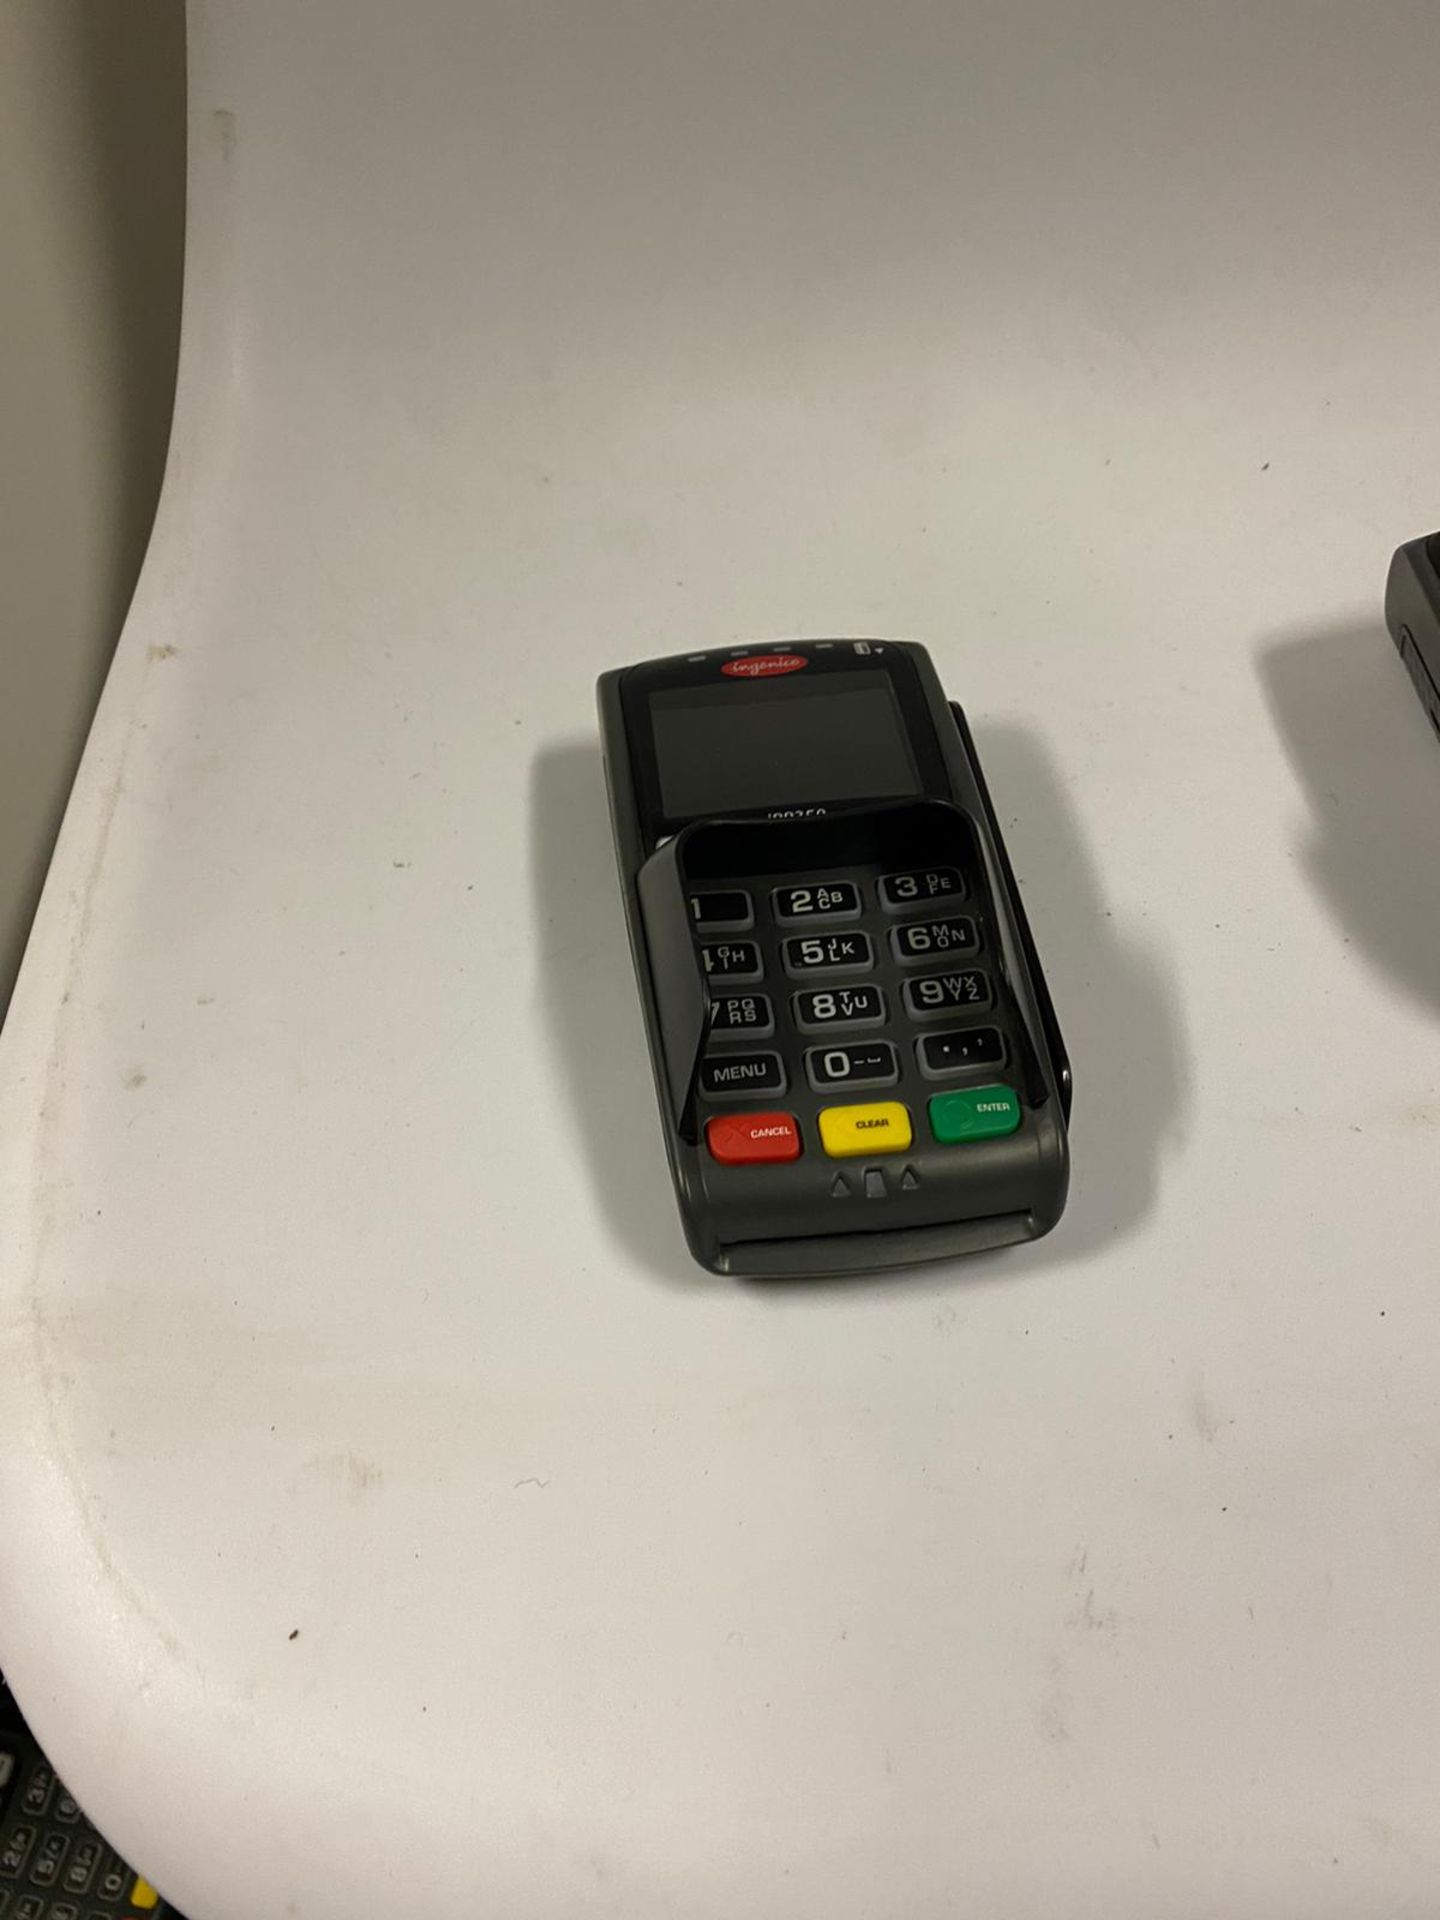 2 x Ingenico IPP350 Contactless Payment Terminal - Used Condition - Location: Altrincham WA14 - - Image 2 of 4